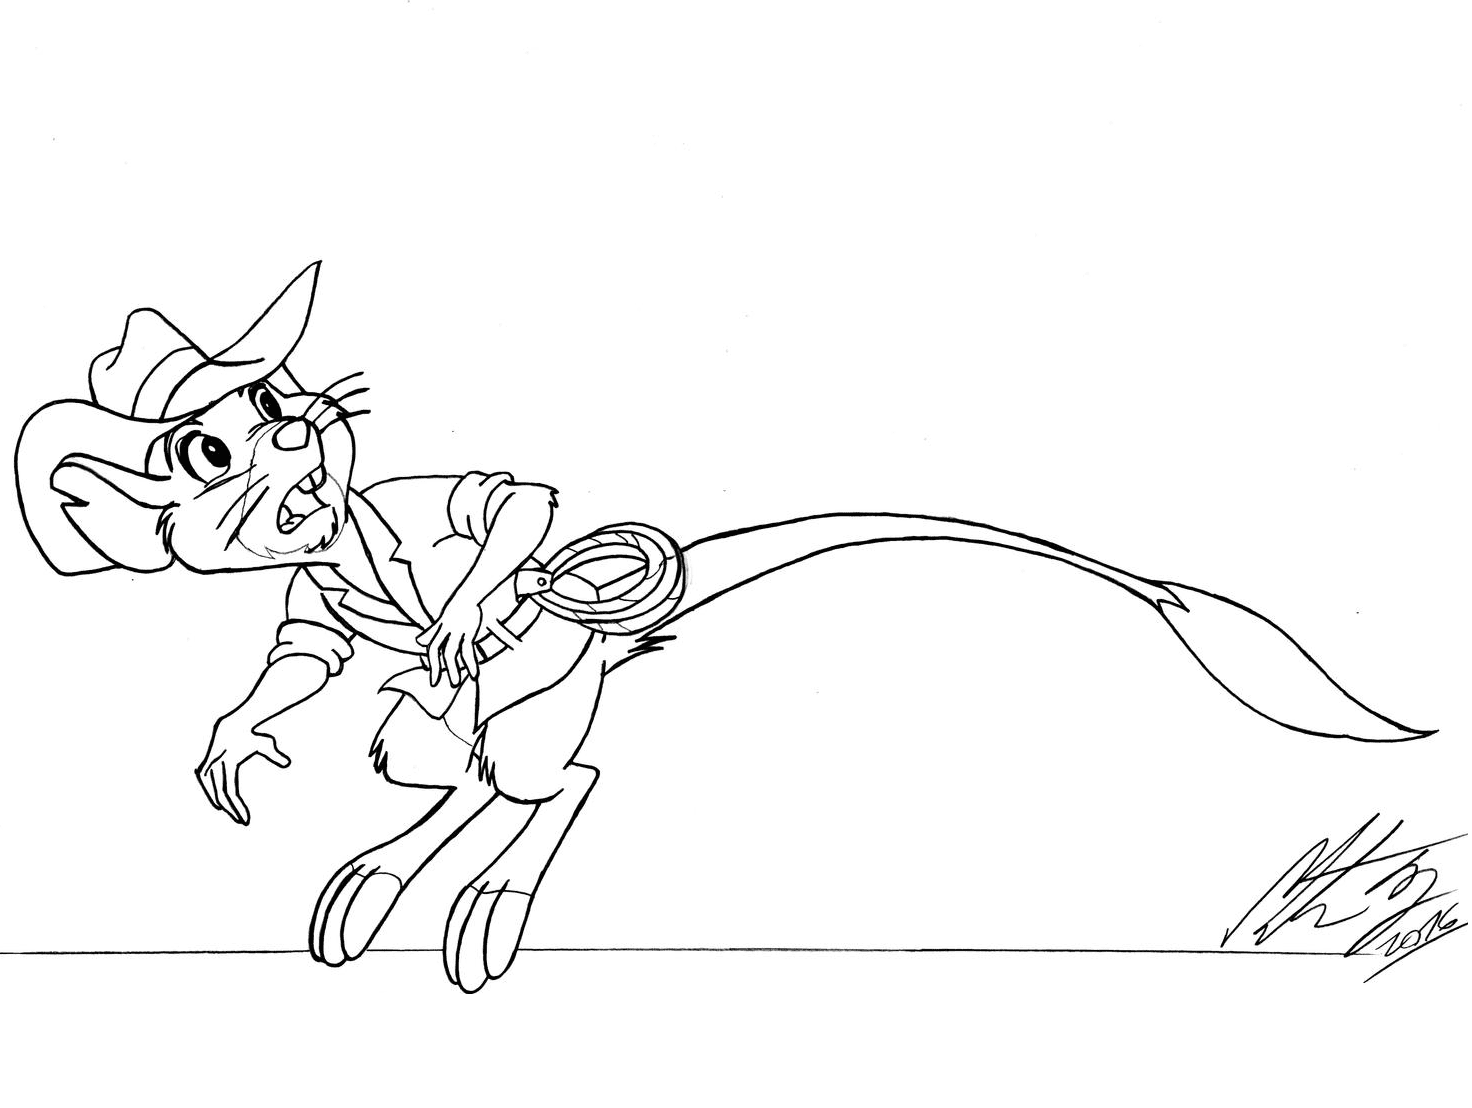 Jake from The Rescuers Coloring Page